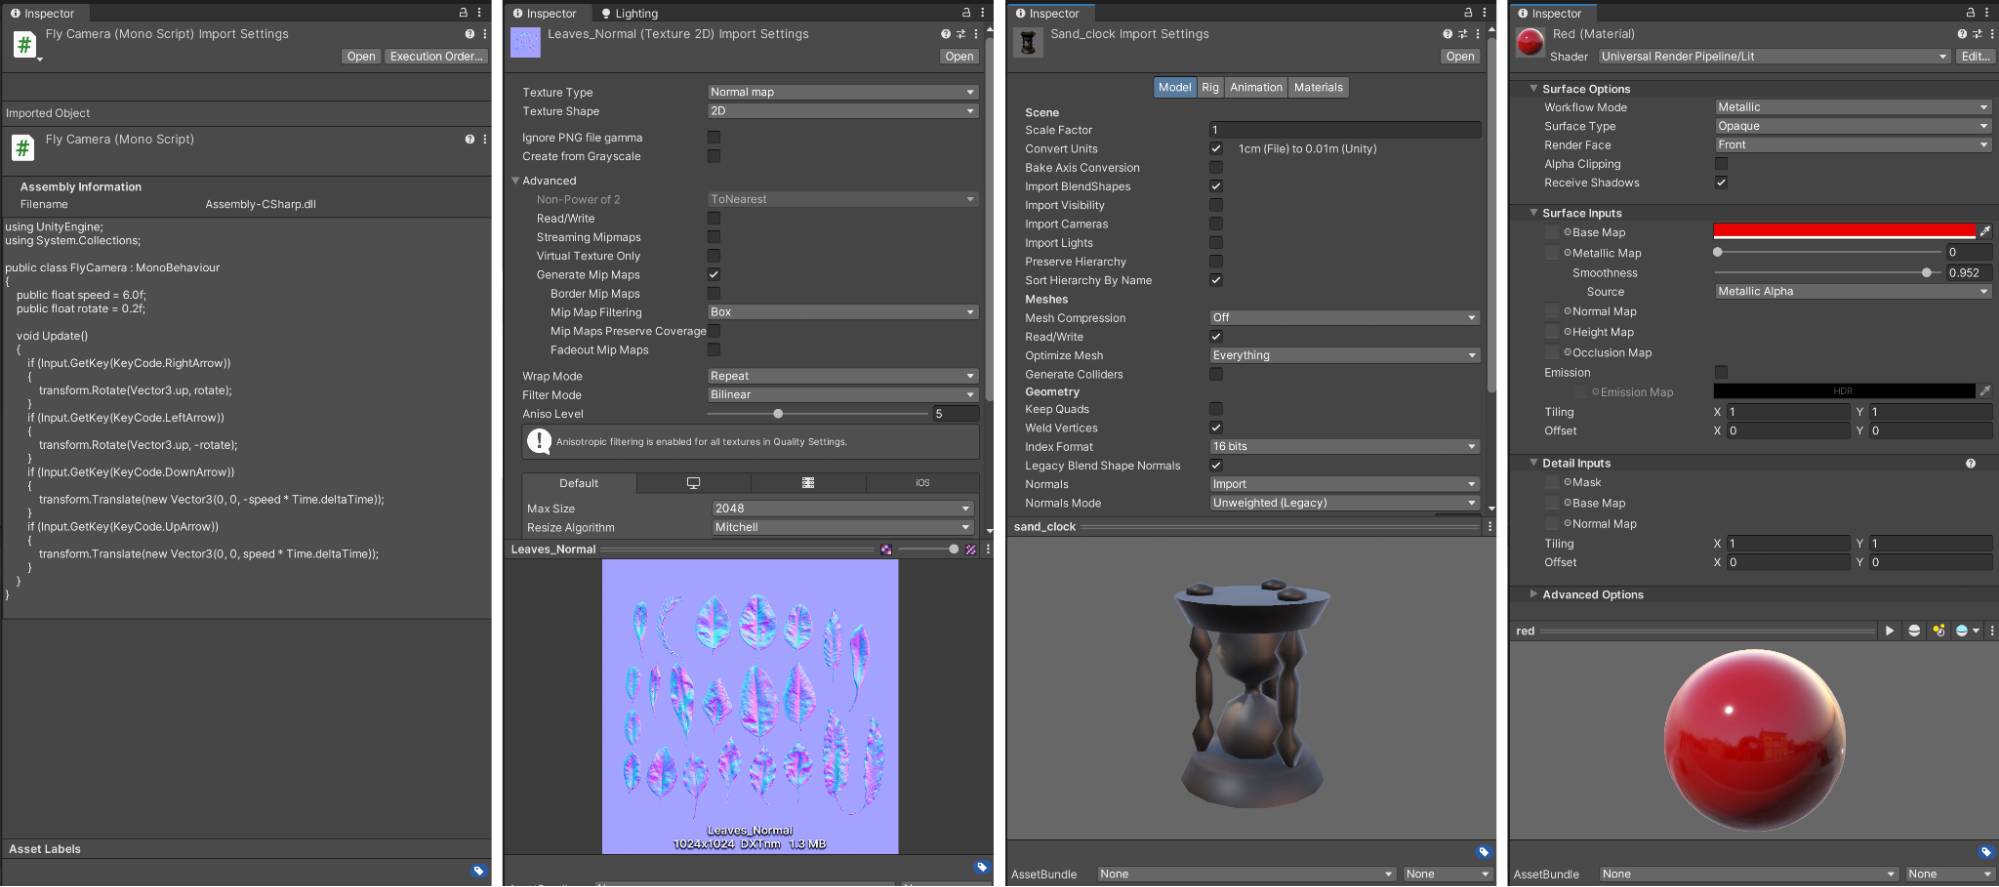 Previsualization and settings for different asset types in the Inspector: C# script, texture, FBX asset, and material